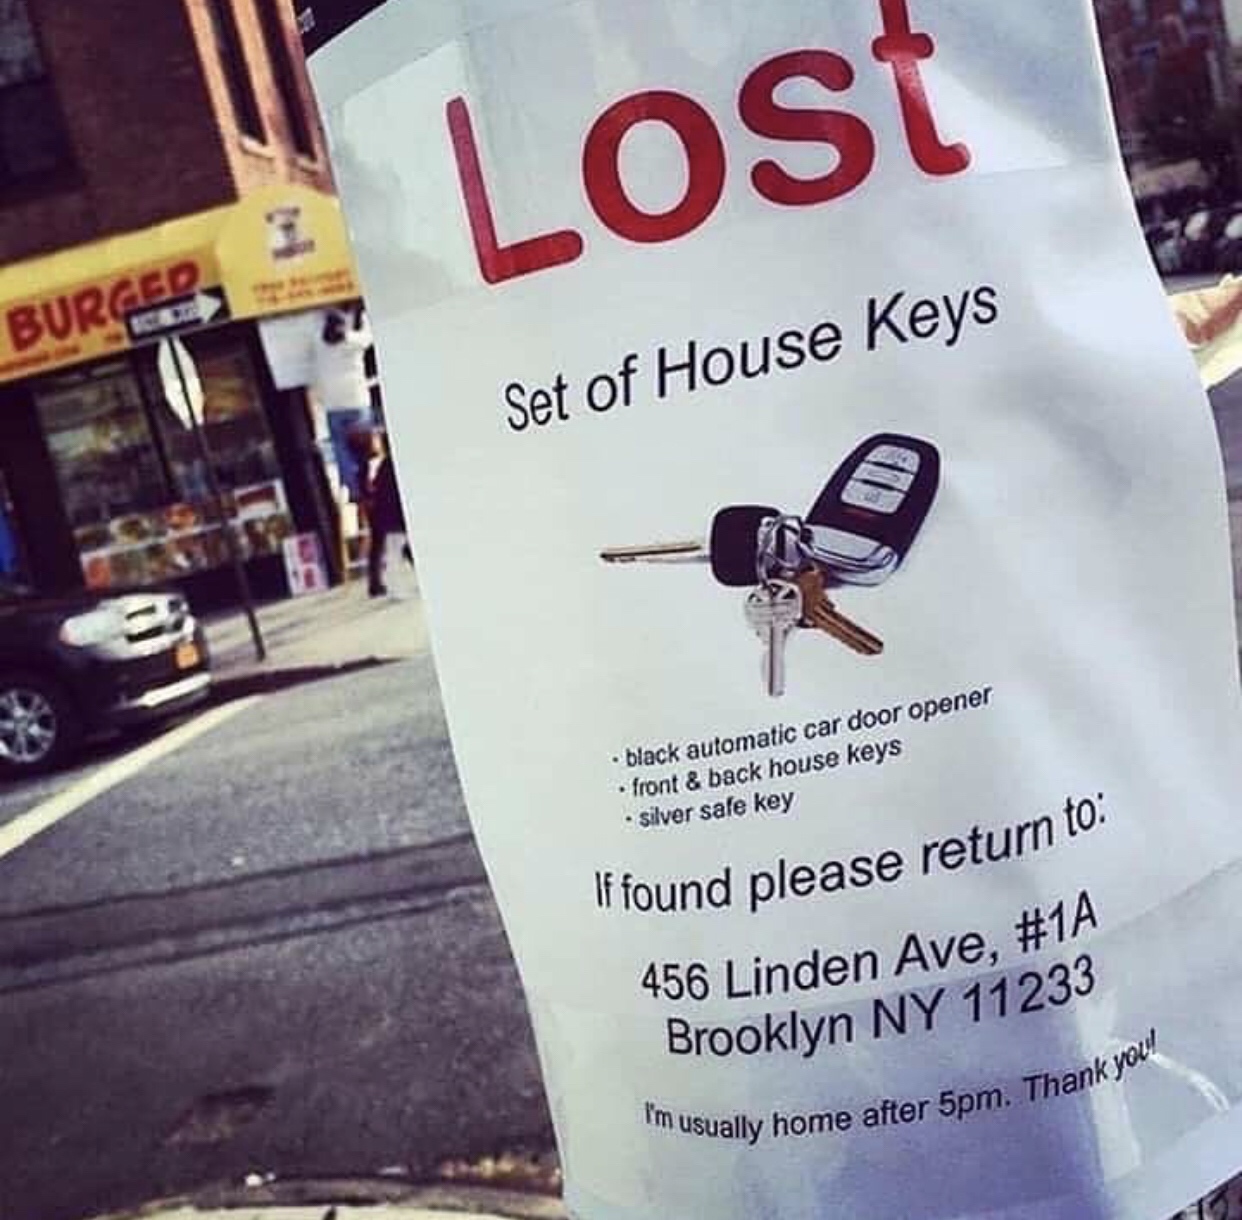 lost keys poster - Lost Burger Set of House Keys black automatic car door opener . front & back house keys silver sale key If found please return to 456 Linden Ave. Brooklyn Ny 11233 I usually home after 5pm. Th opm. Thank you!